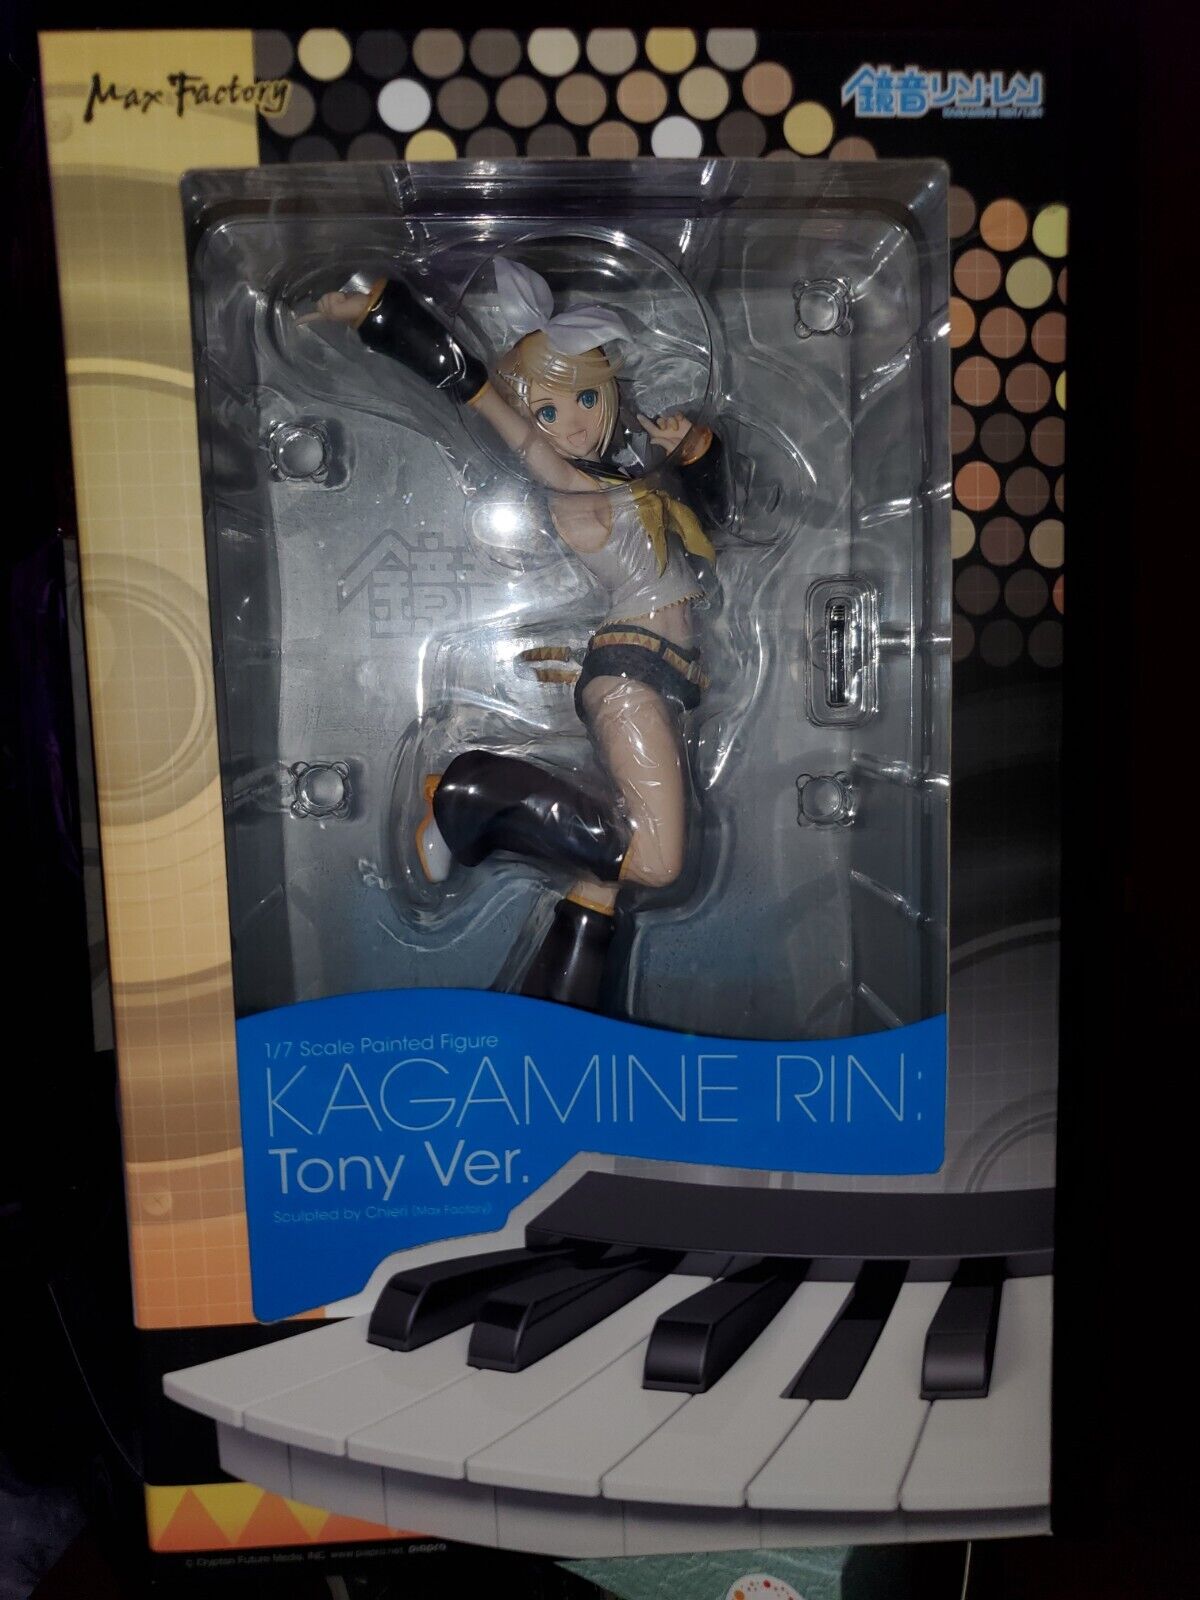 Vocaloid Series 02 Rin Kagamine Tony Ver. Max Factory Japan F/S NEW AUTHENTIC